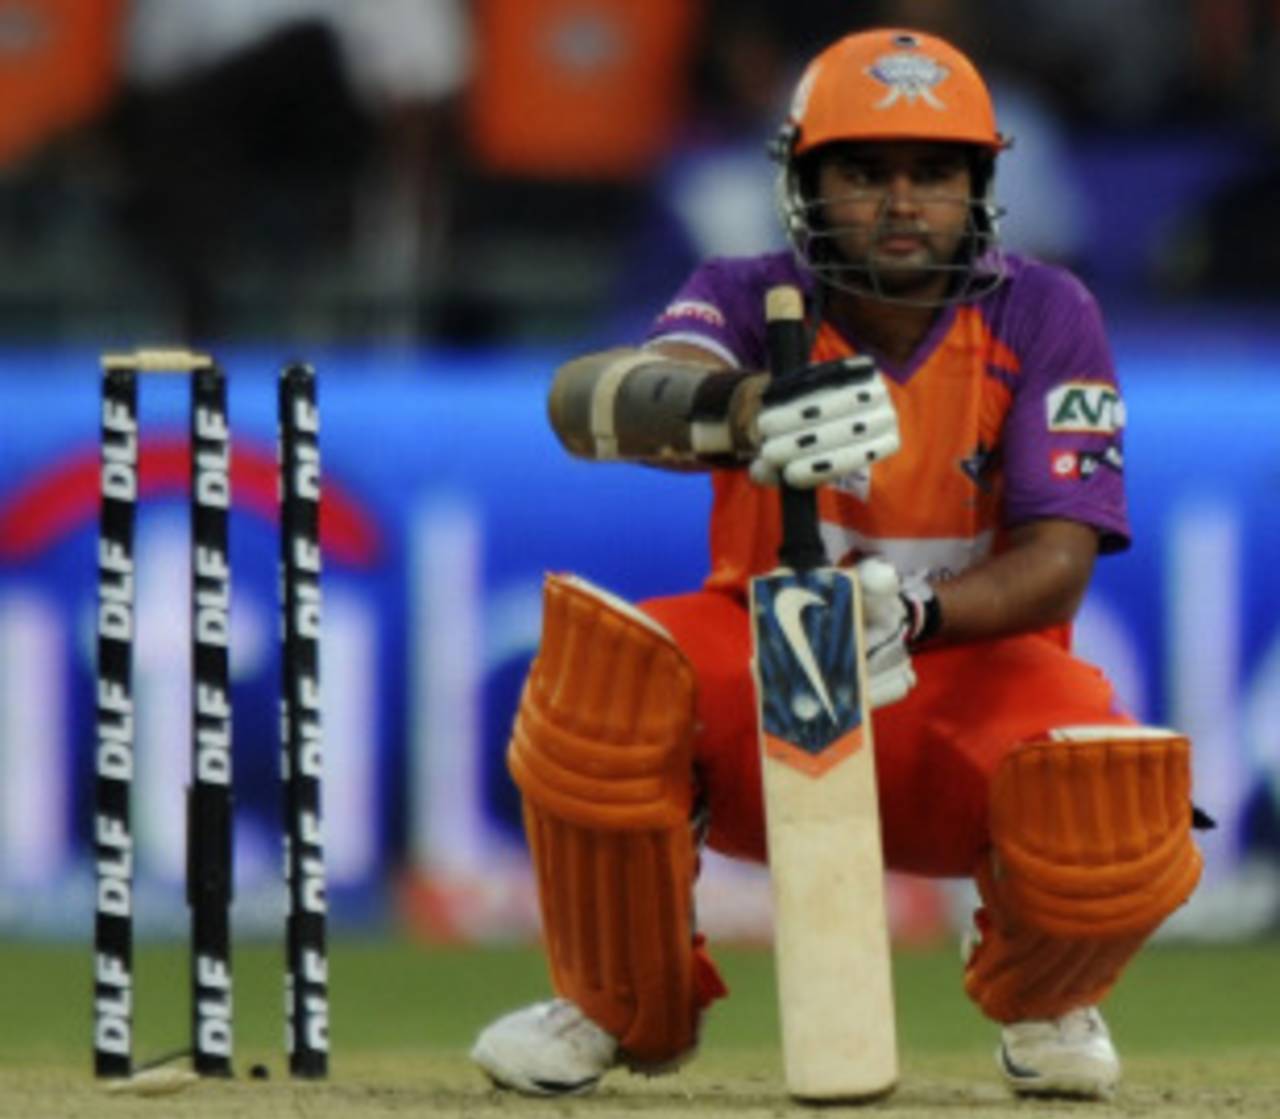 Parthiv Patel is distraught after being bowled by a ball that kept alarmingly low, Kochi Tuskers Kerala v Delhi Daredevils, IPL 2011, Kochi, April 30, 2011